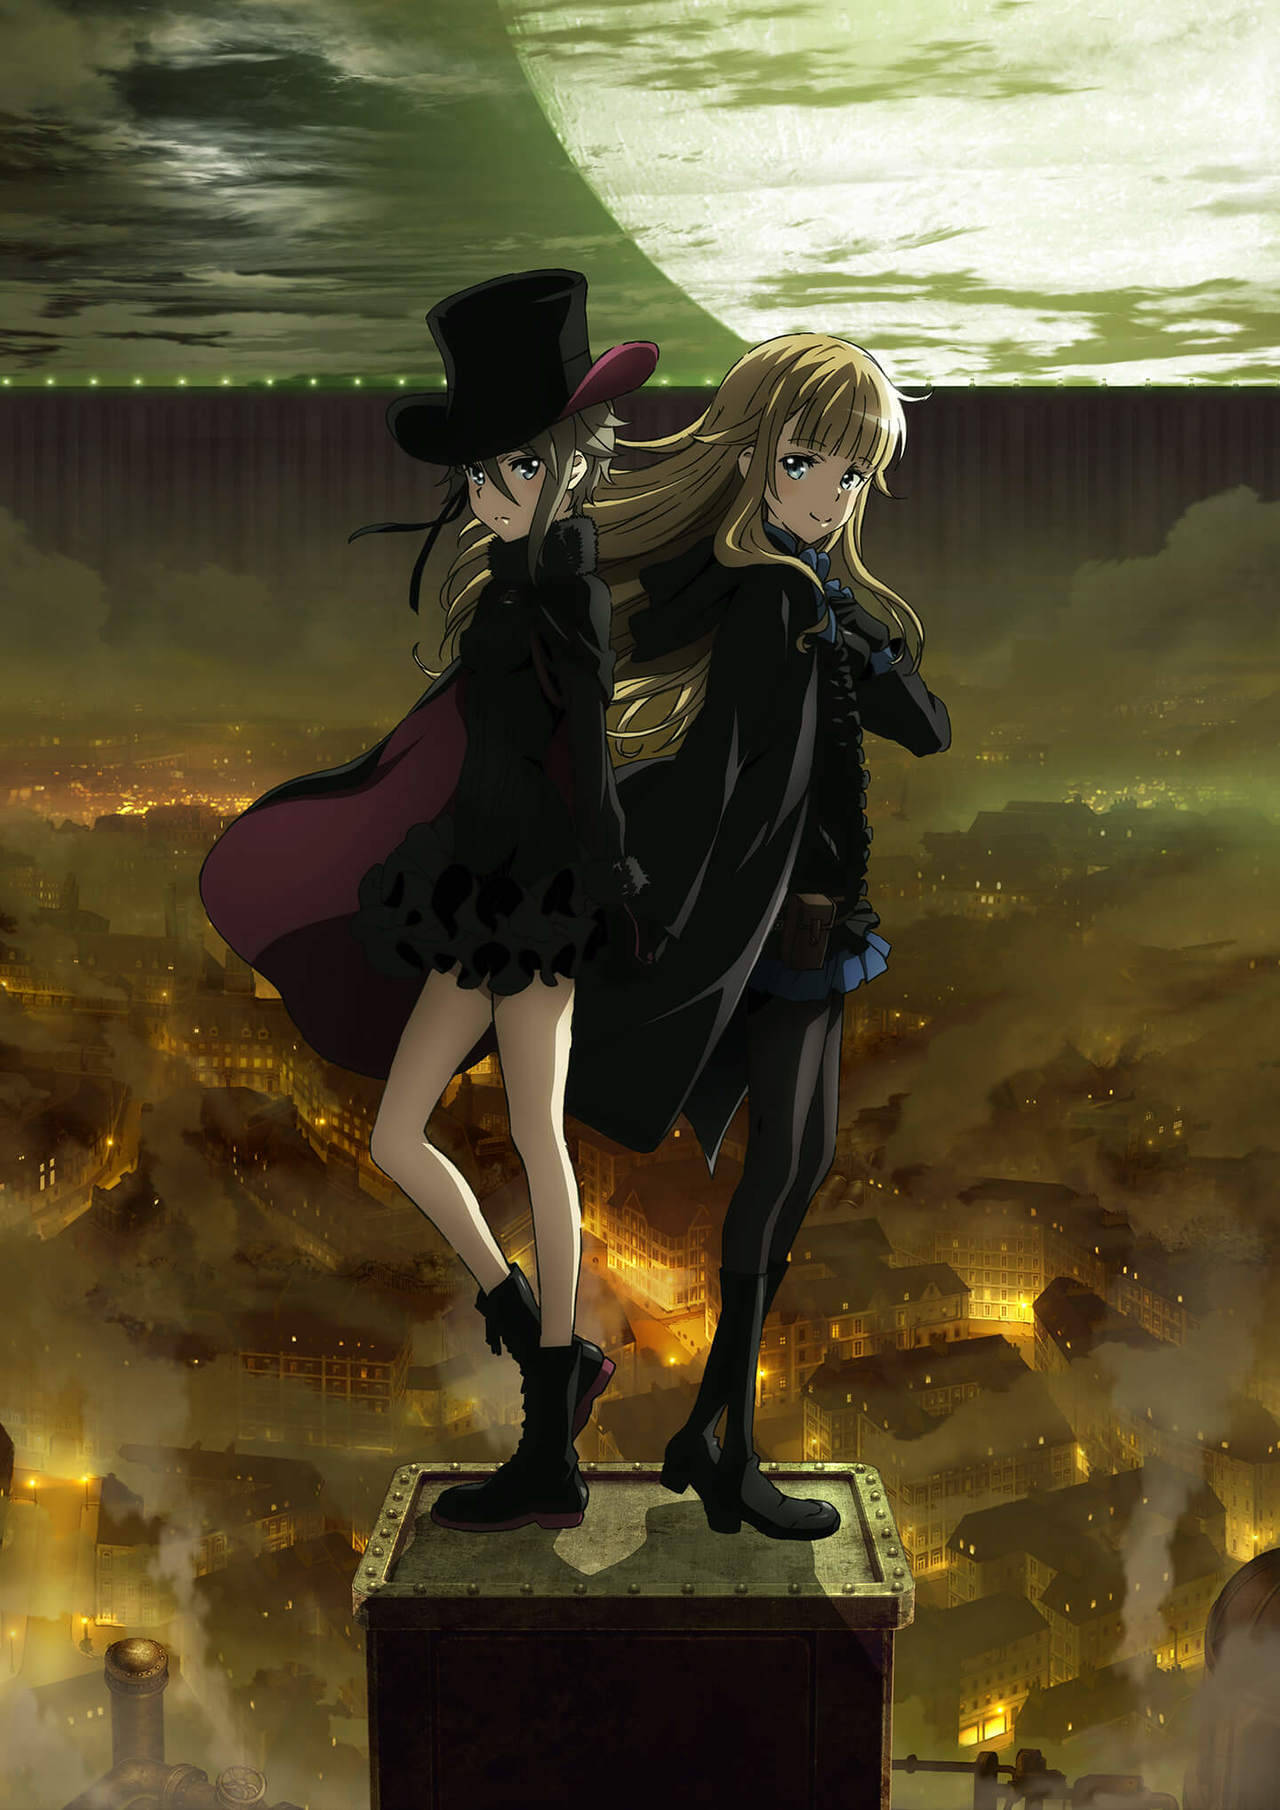 A promotional video for the â��Princess Principal: Crown Handlerâ�� Part I anime film is now available; part of a six-part film sequel series. Itâ��ll open in Japanese theaters April 10th, 2020.
-Staff-â�¢ Director: Masaki Tachibana
â�¢ Script: Noboru Kimura
â�¢...